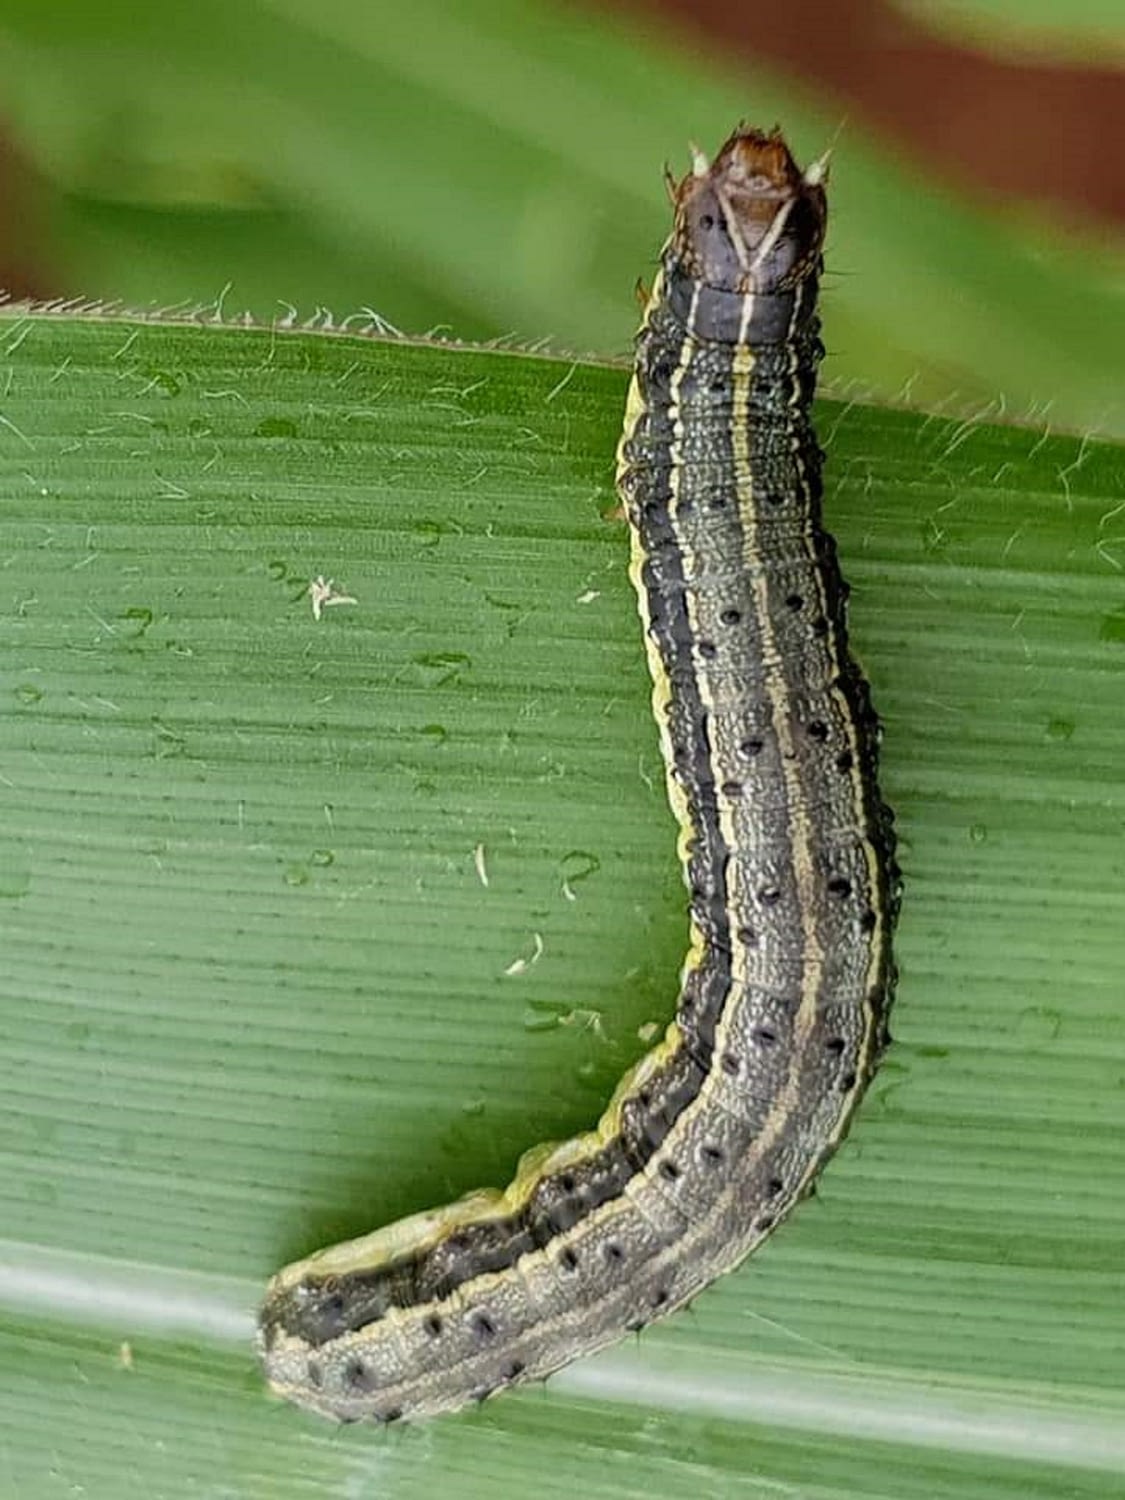 Integrated pest management strategies have been key in dealing with fall armyworm in Africa and Asia. (Photo: B.M. Prasanna/CIMMYT)